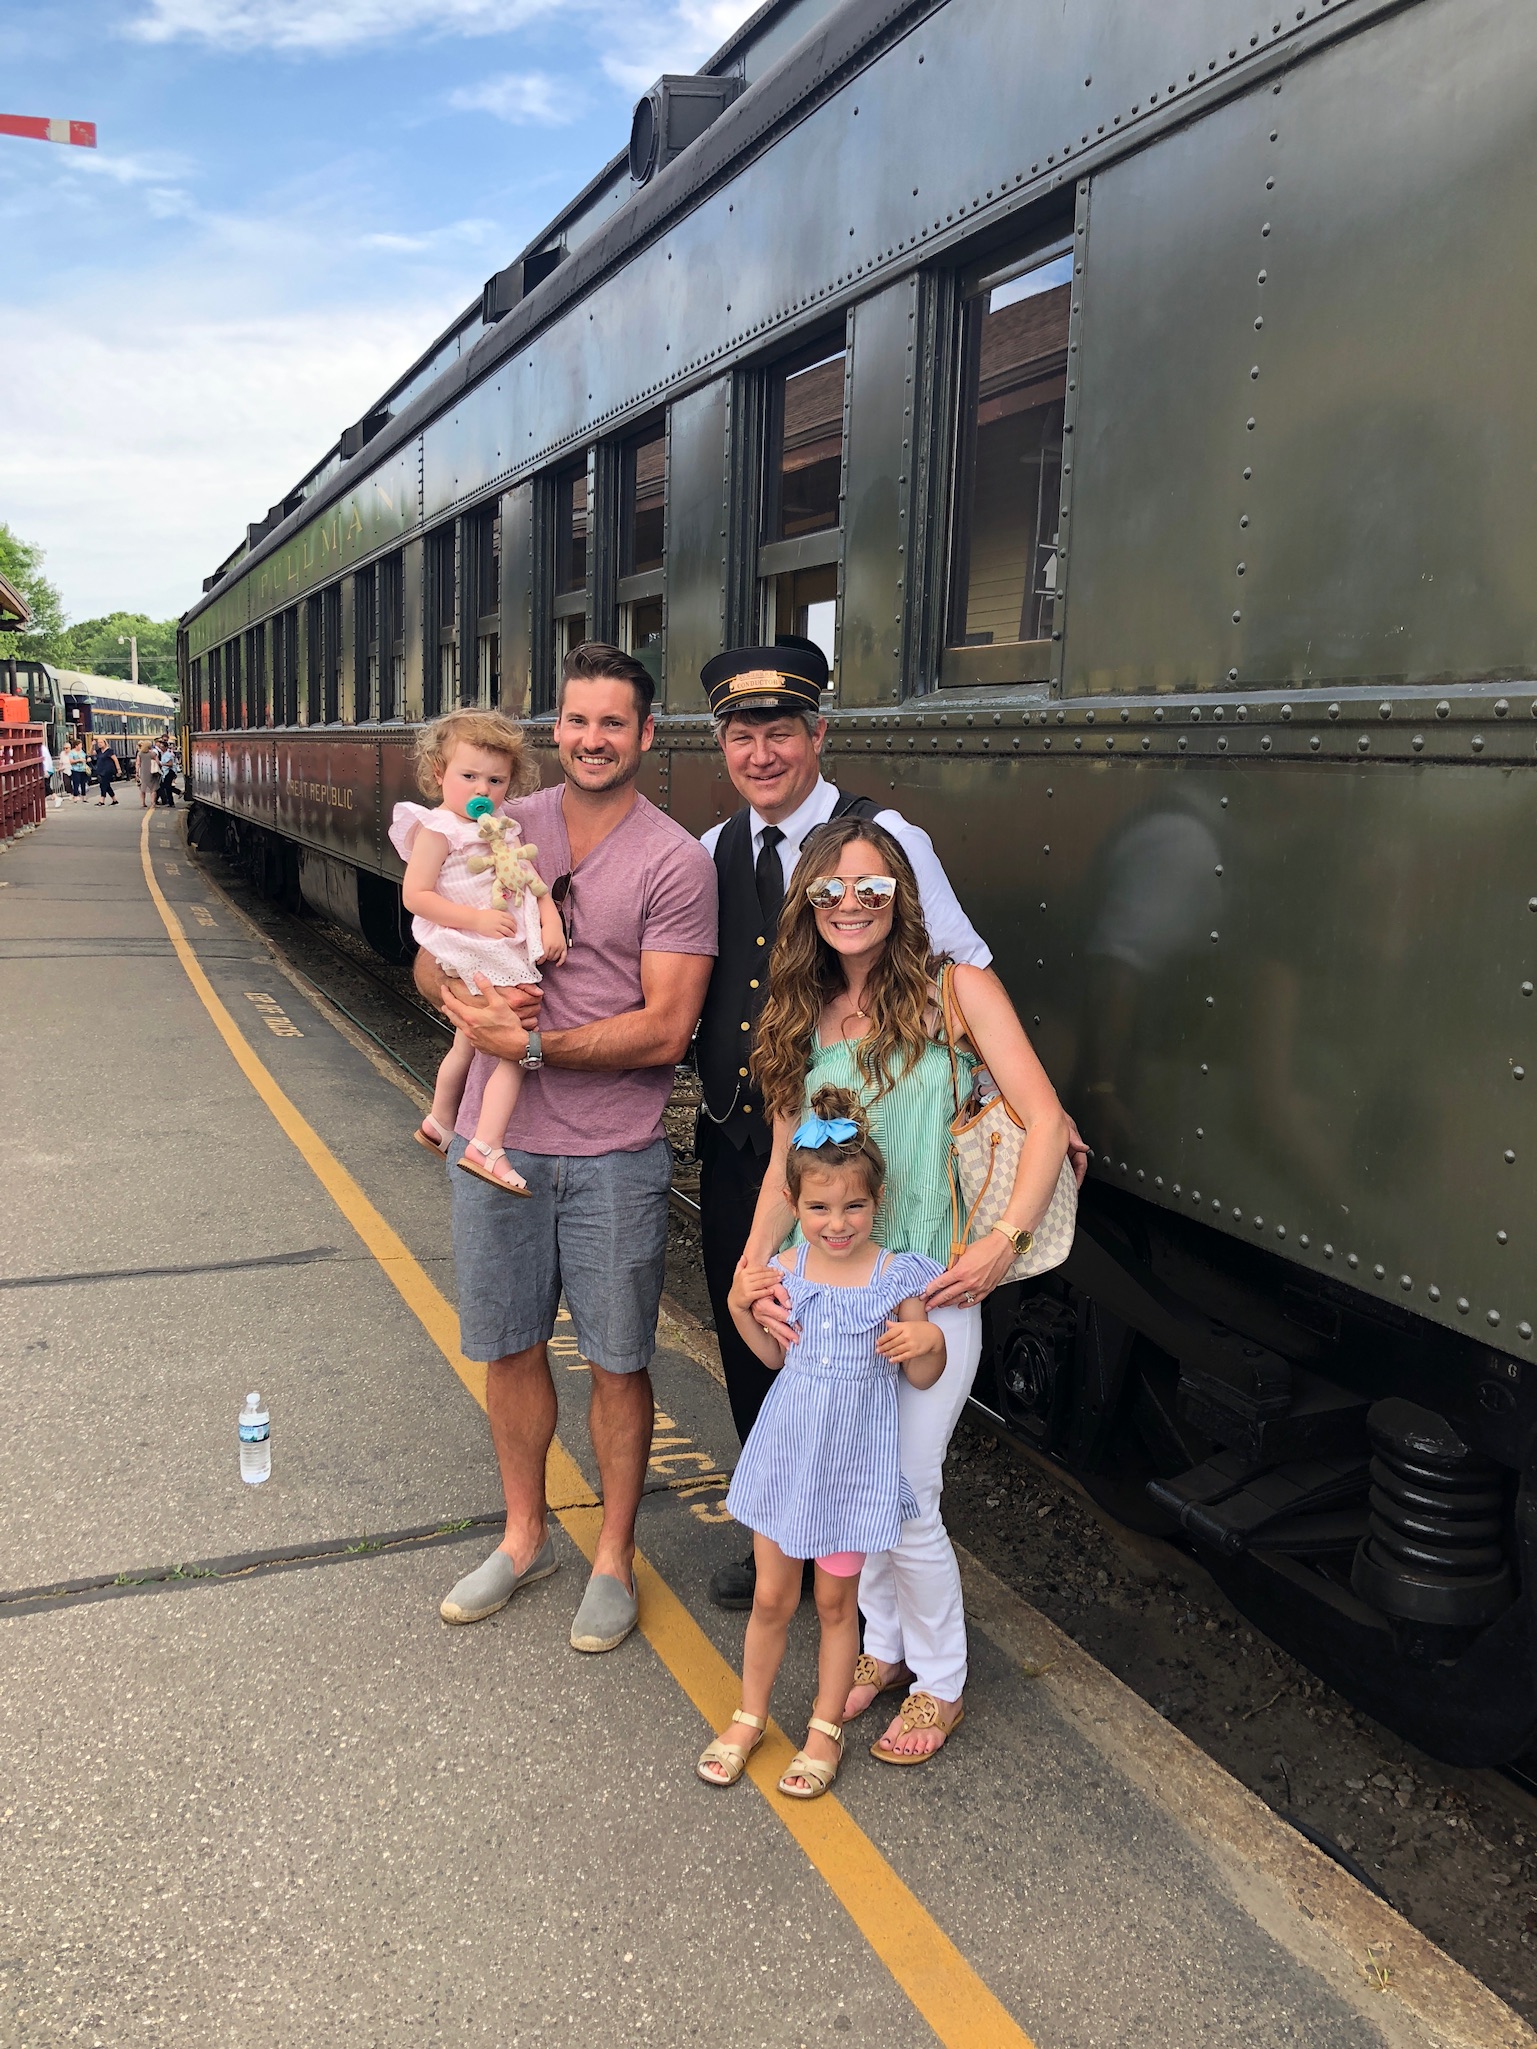 Essex Steam Train Conductor and Family